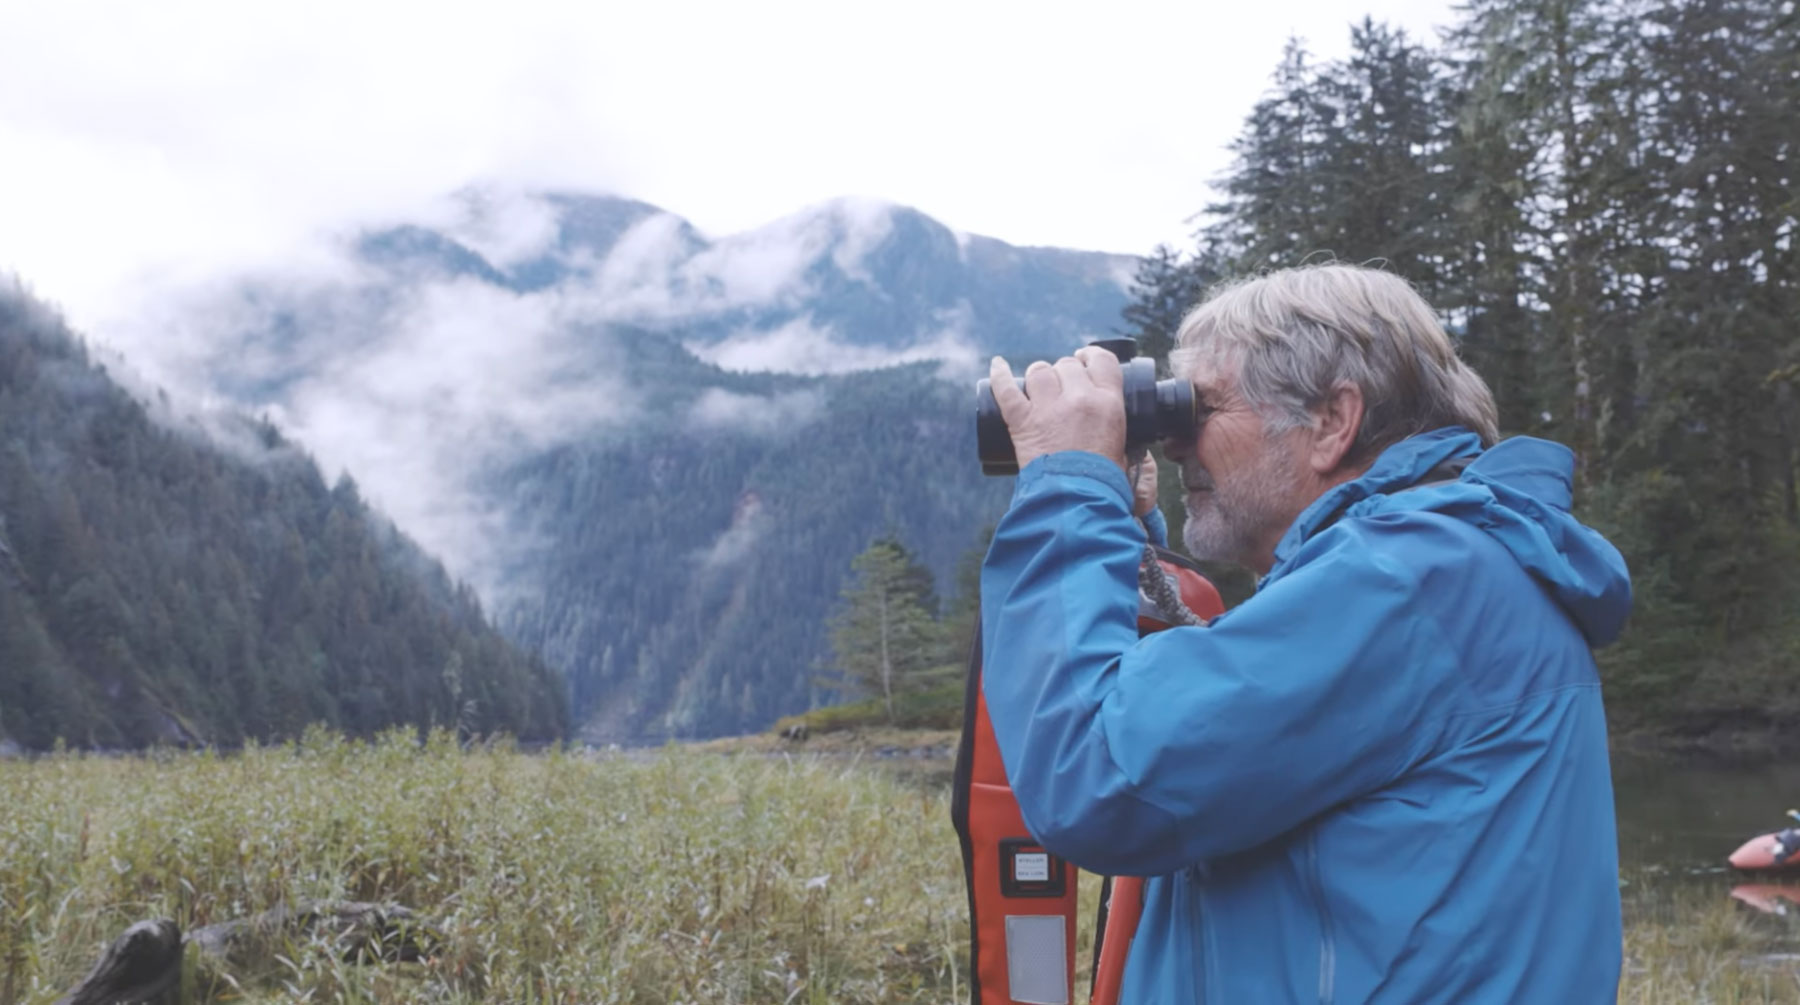 Brian Falconer looks through his binoculars on a misty and foggy day in the Great Bear Rainforest.